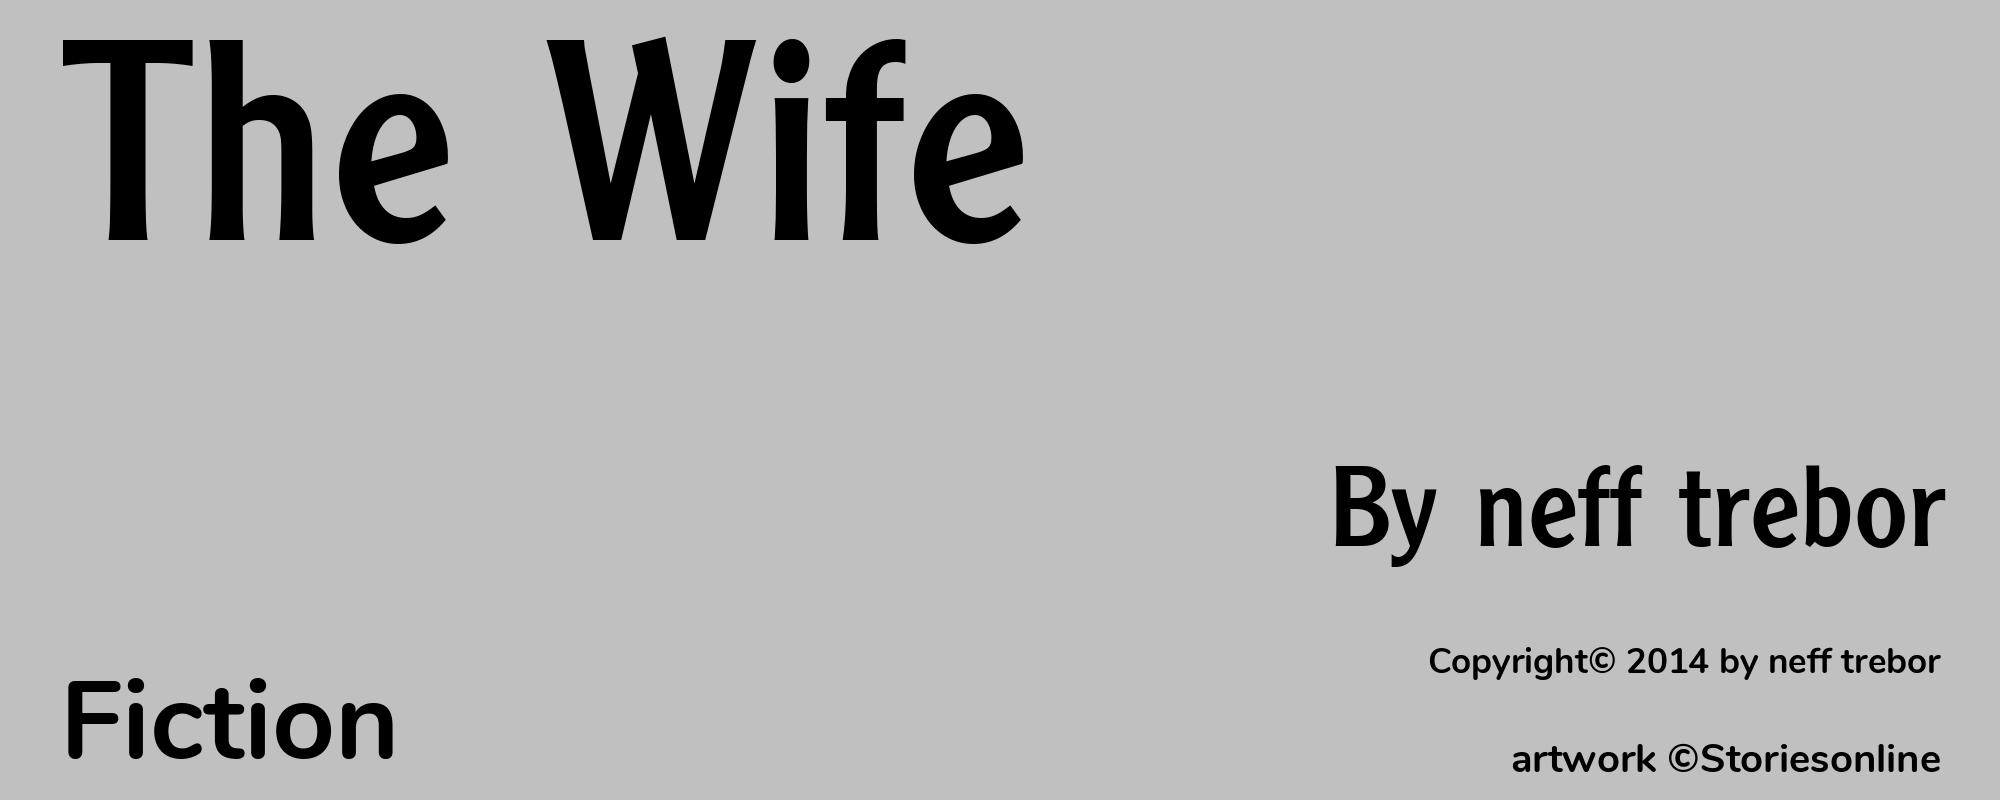 The Wife - Cover